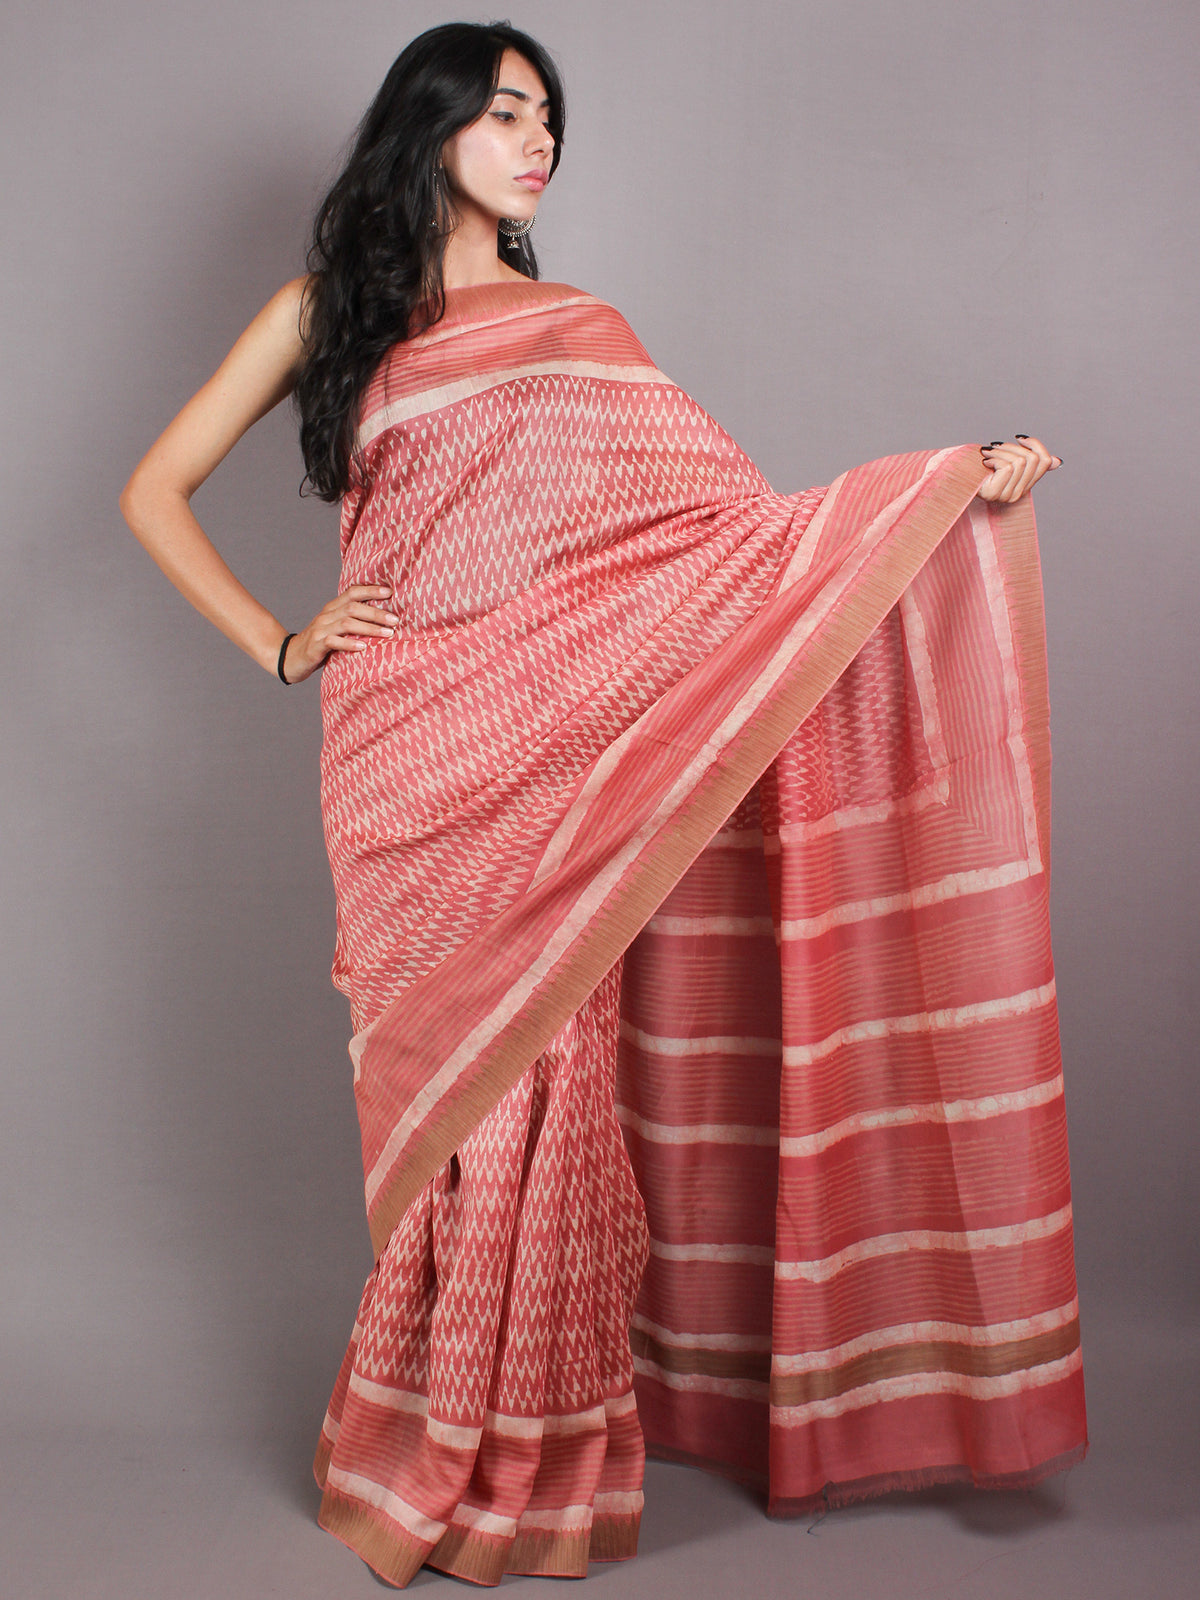 Pastel Peach Beige White Hand Block Printed in Natural Vegetable Colors Chanderi Saree With Geecha Border - S03170378